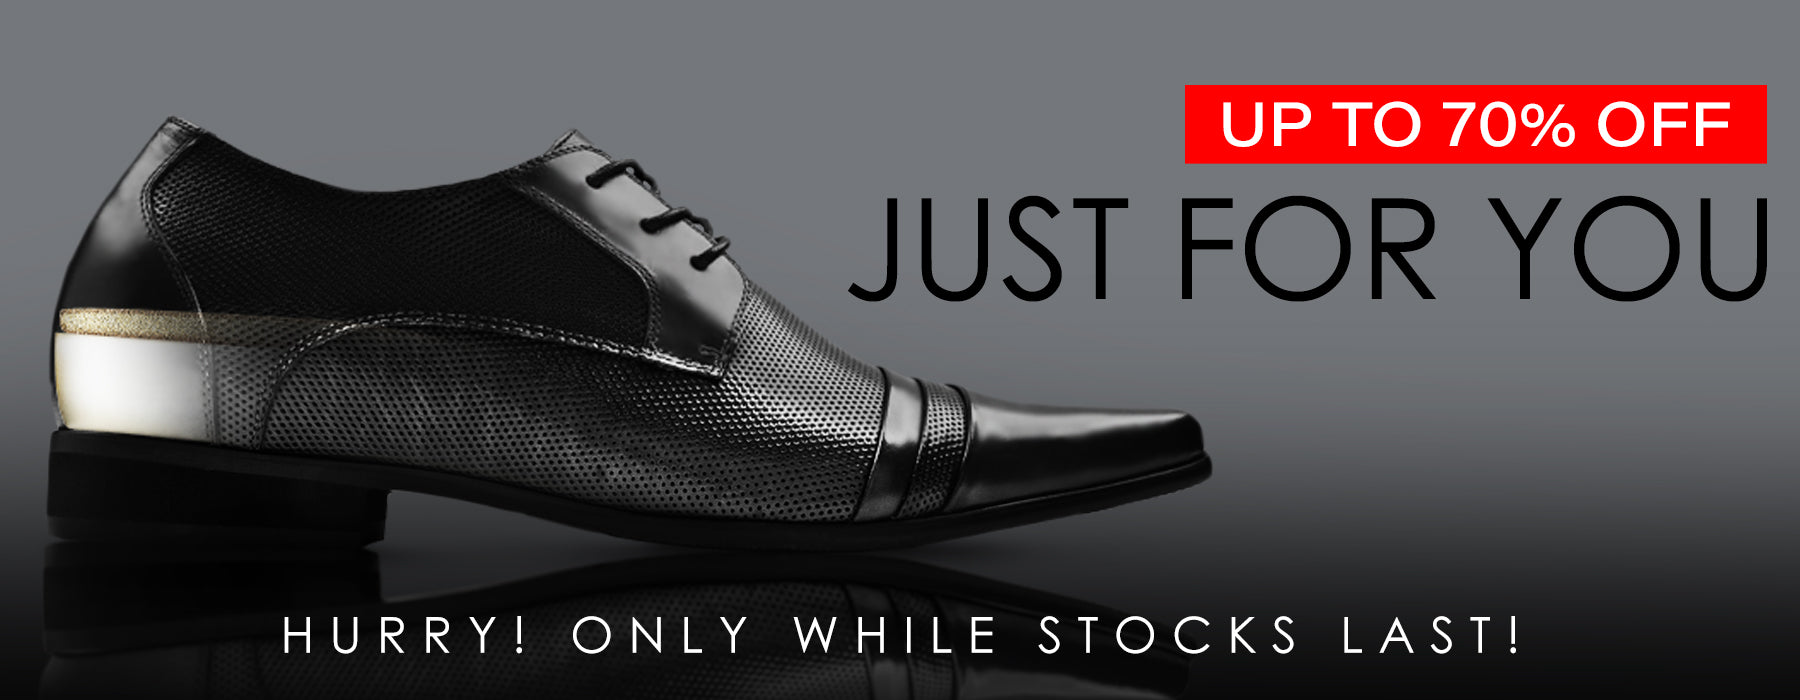 JENNEN Shoes Special Offer